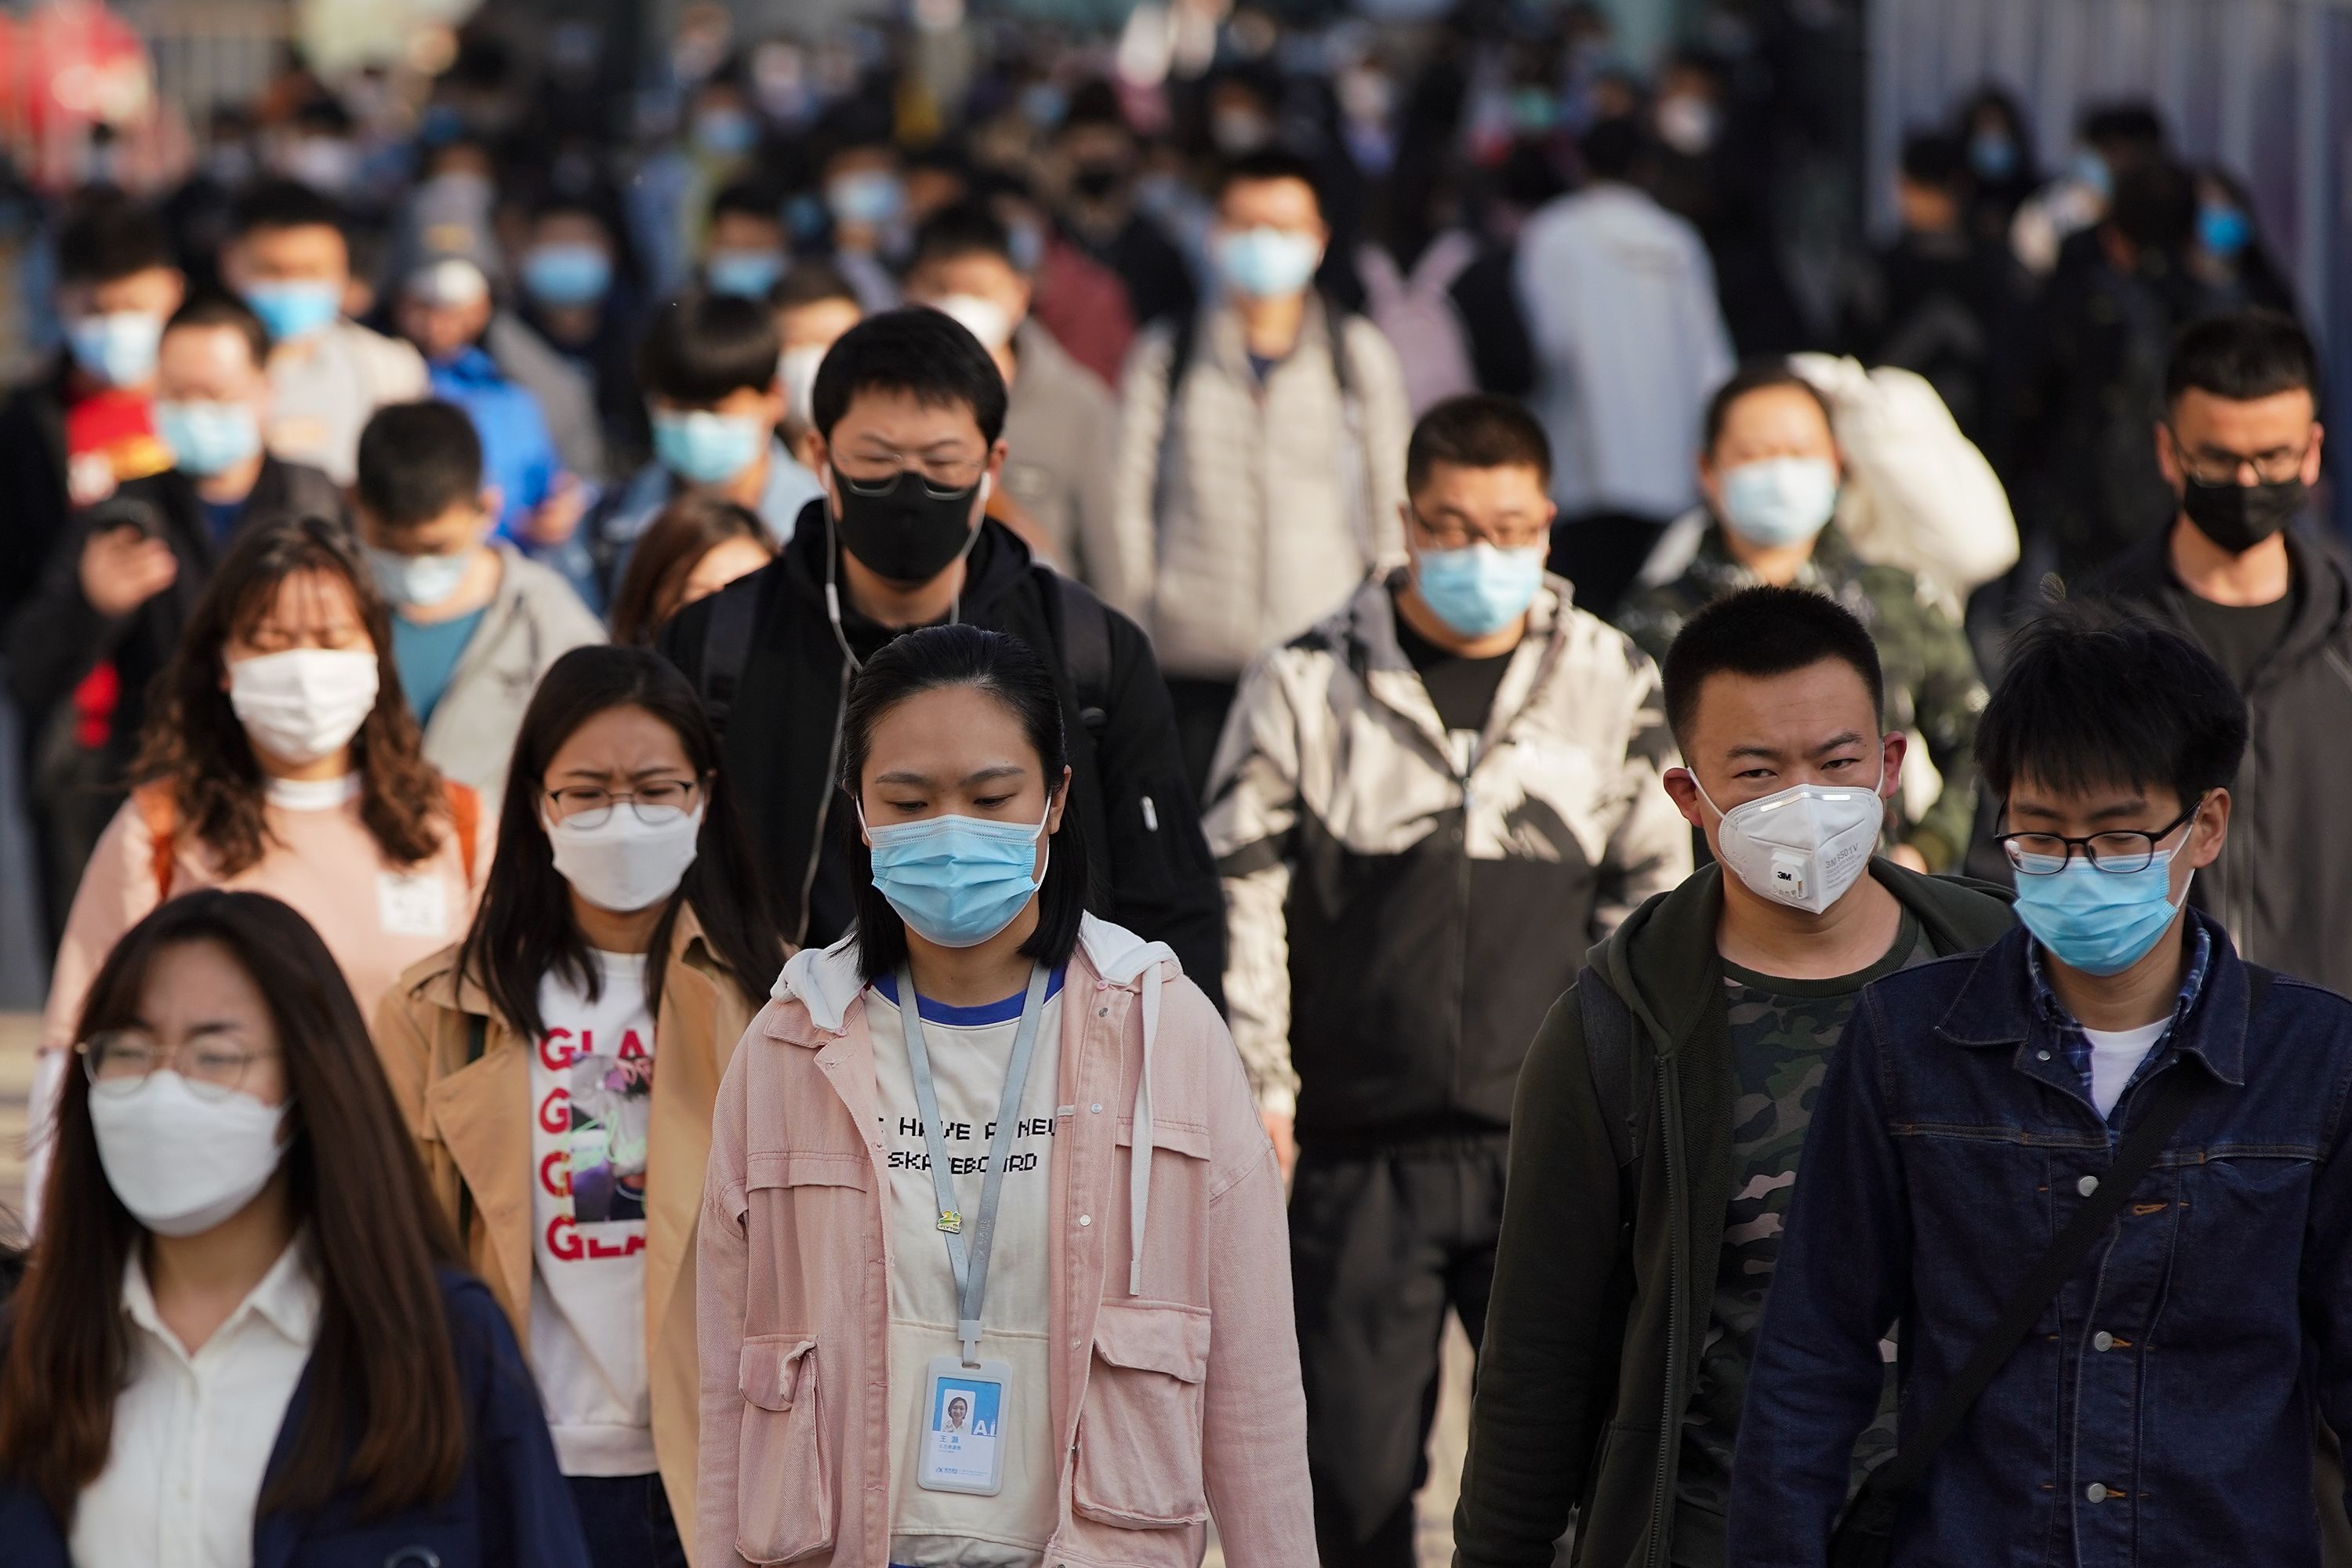 People in China wear masks to protect against COVID-19.